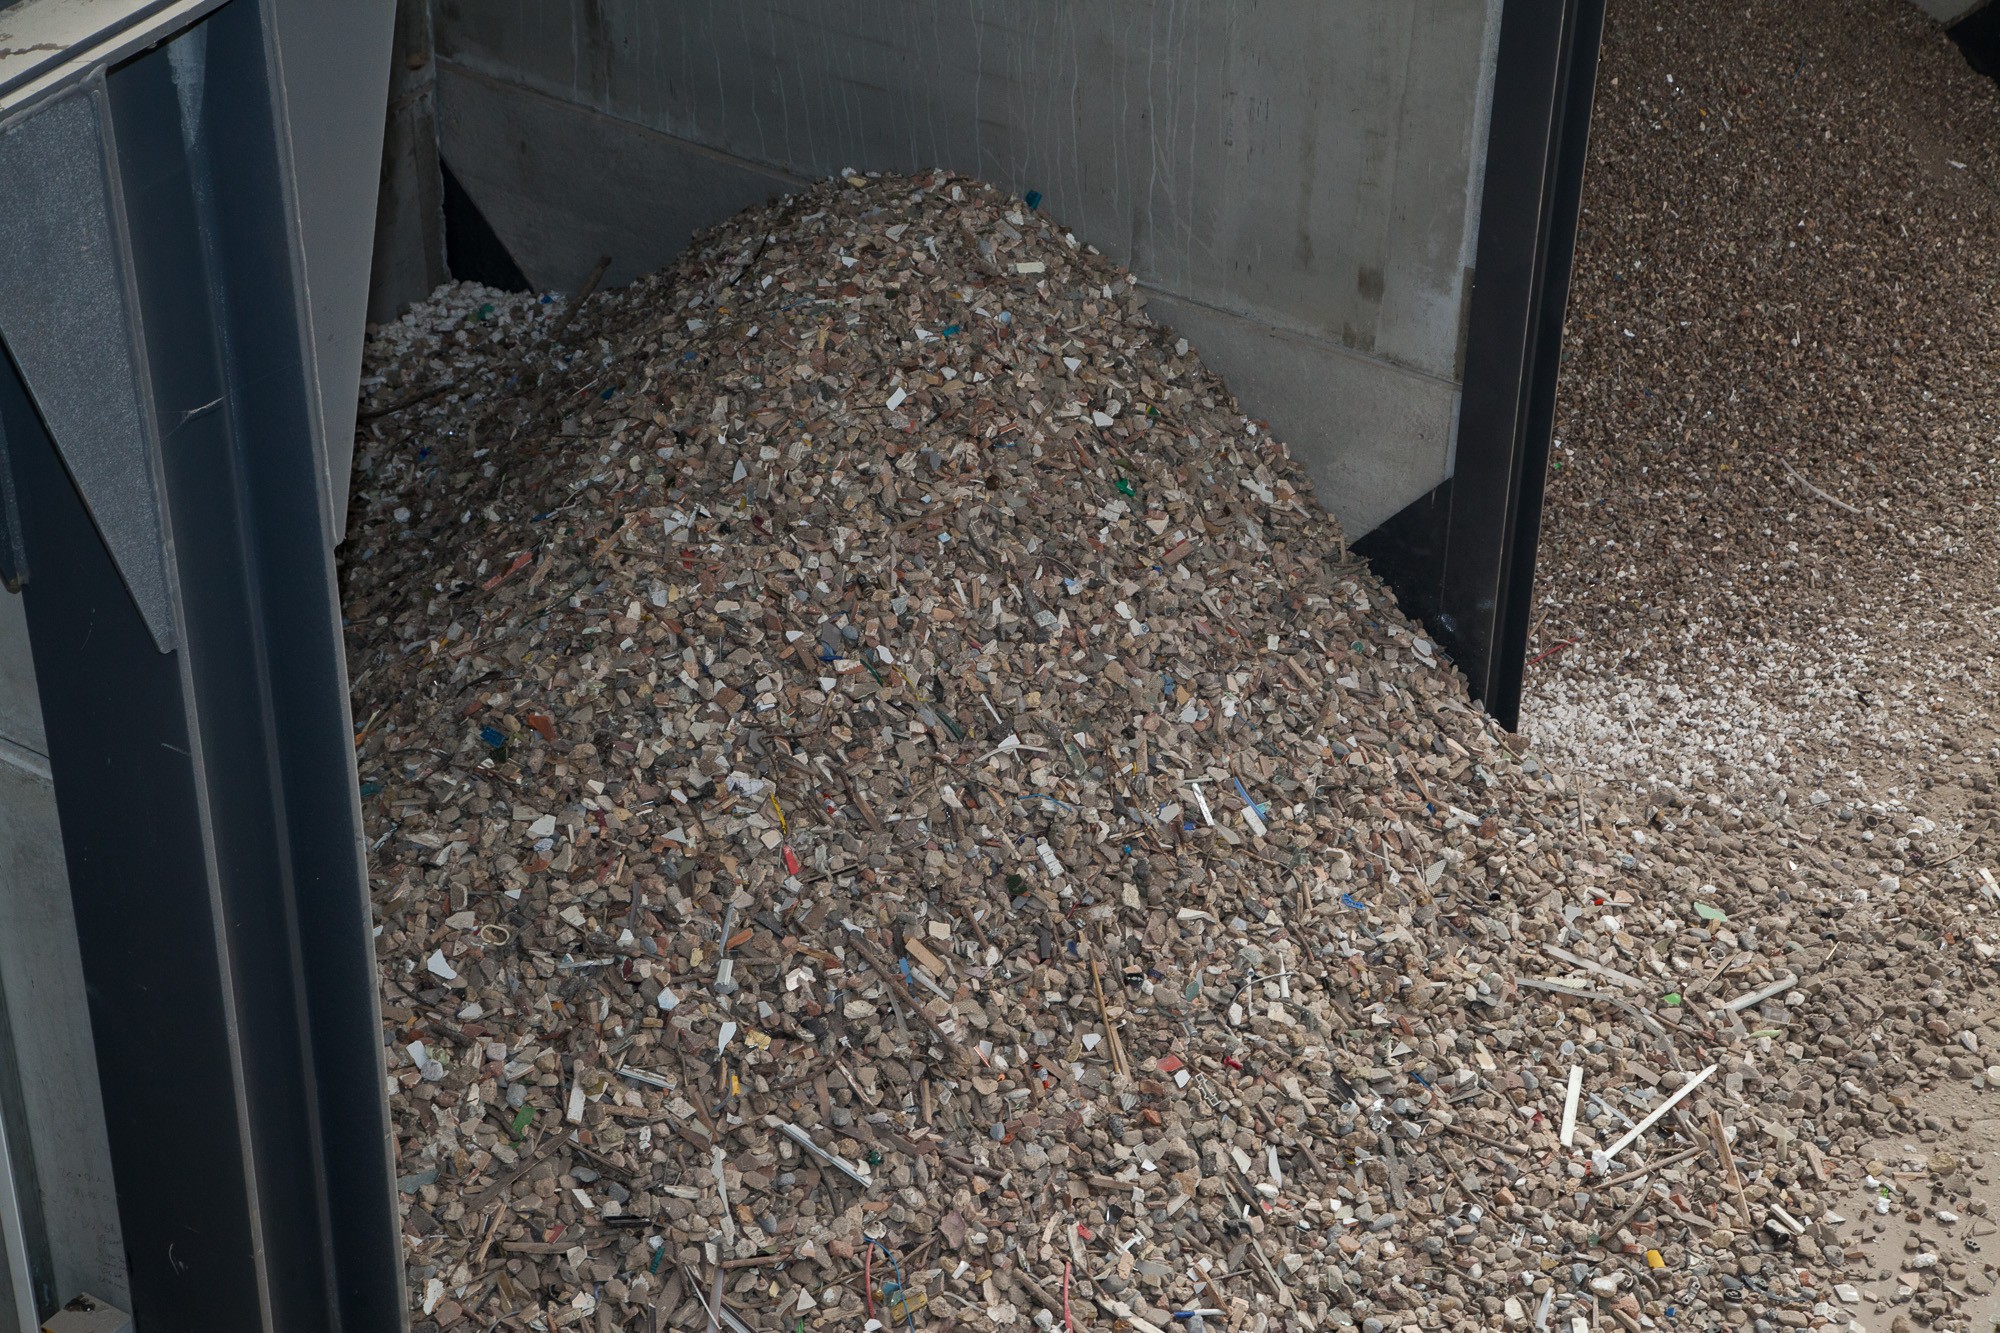 Sand and gravel aggregate type supplies from Woodford Recycling